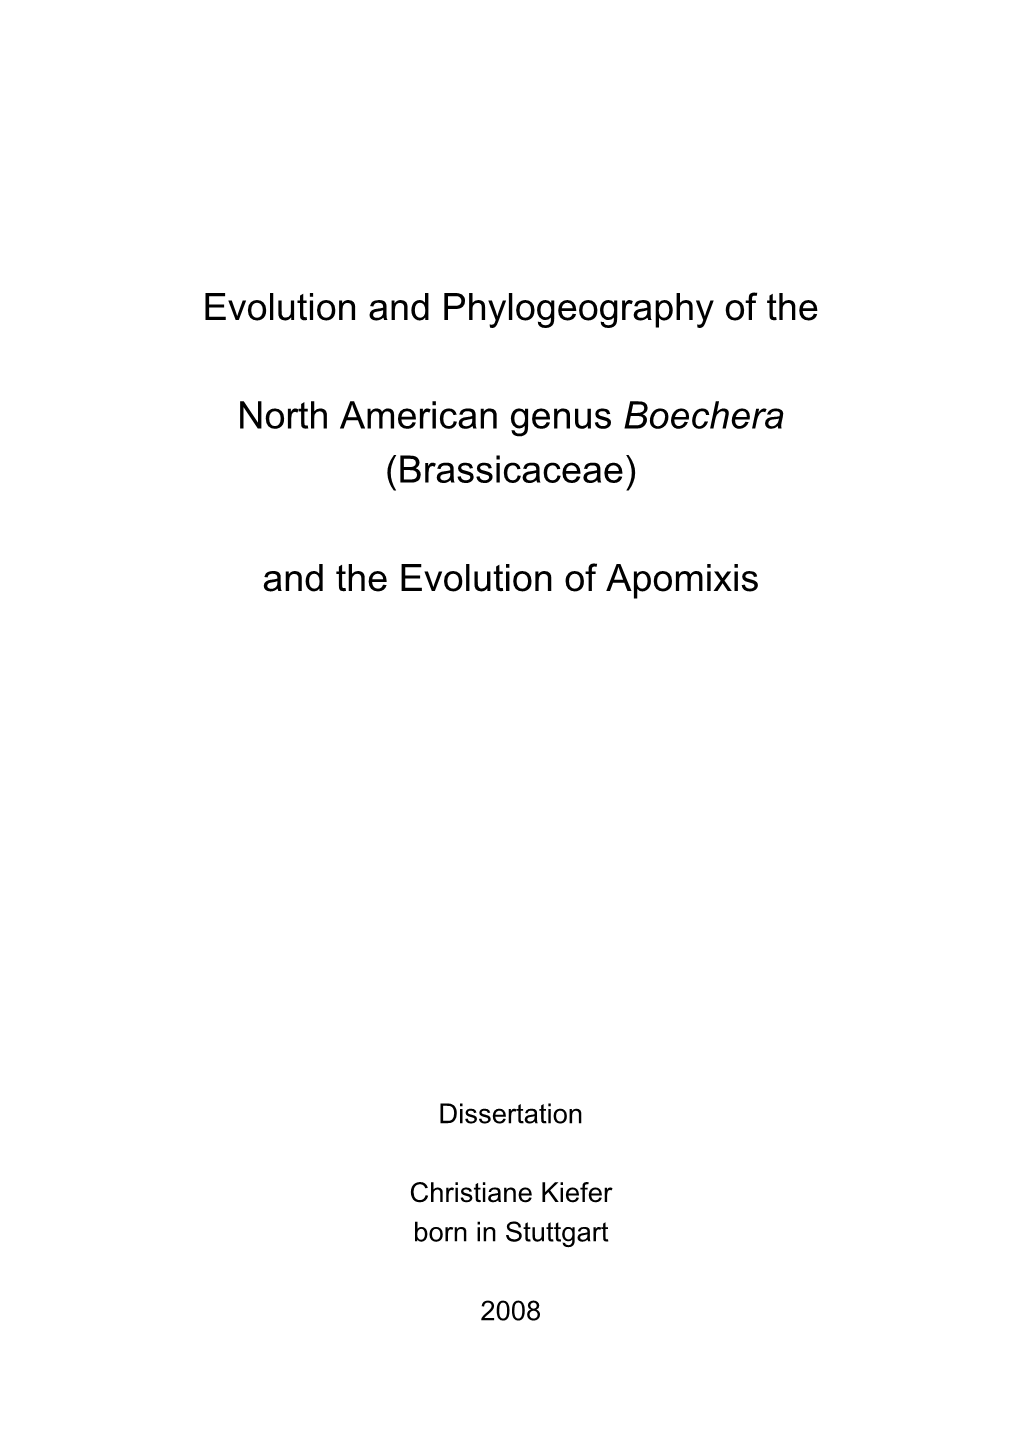 Evolution and Phylogeography of Brassicaceae